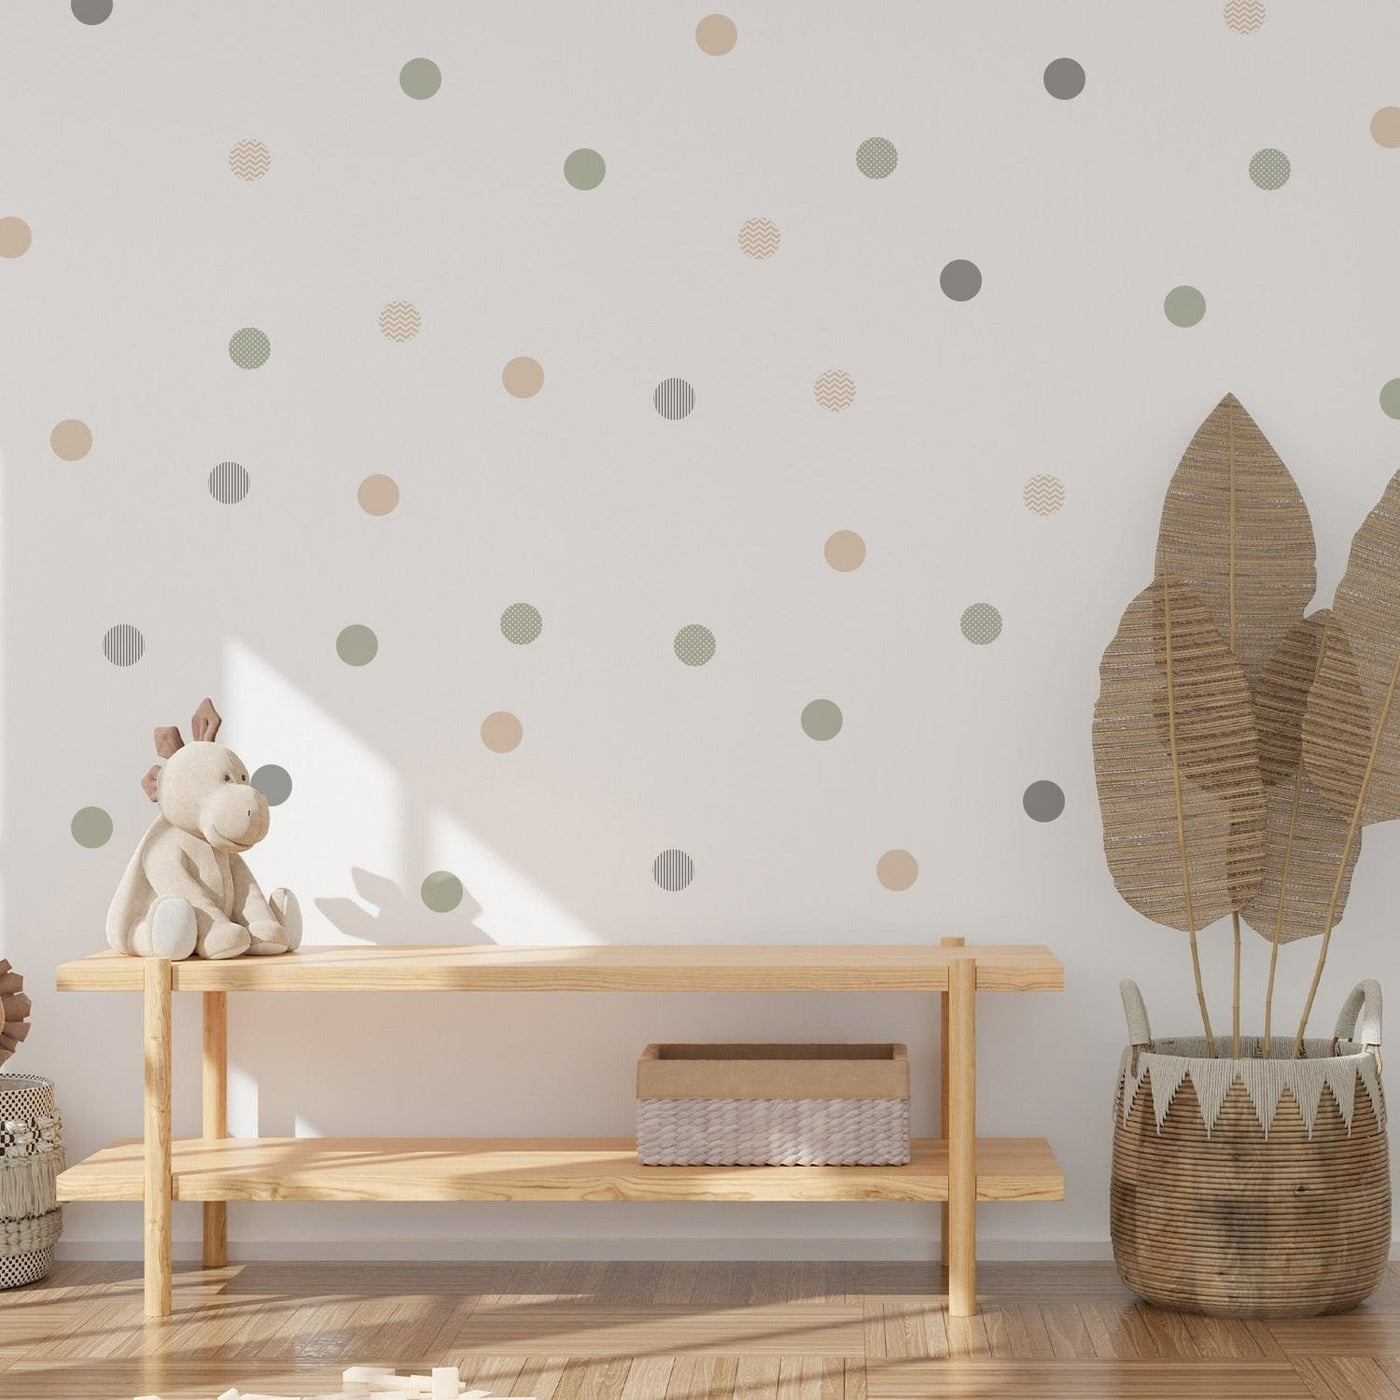 Boho Pattern Polka Dot Nursery Wall Decals - Parker and Olive